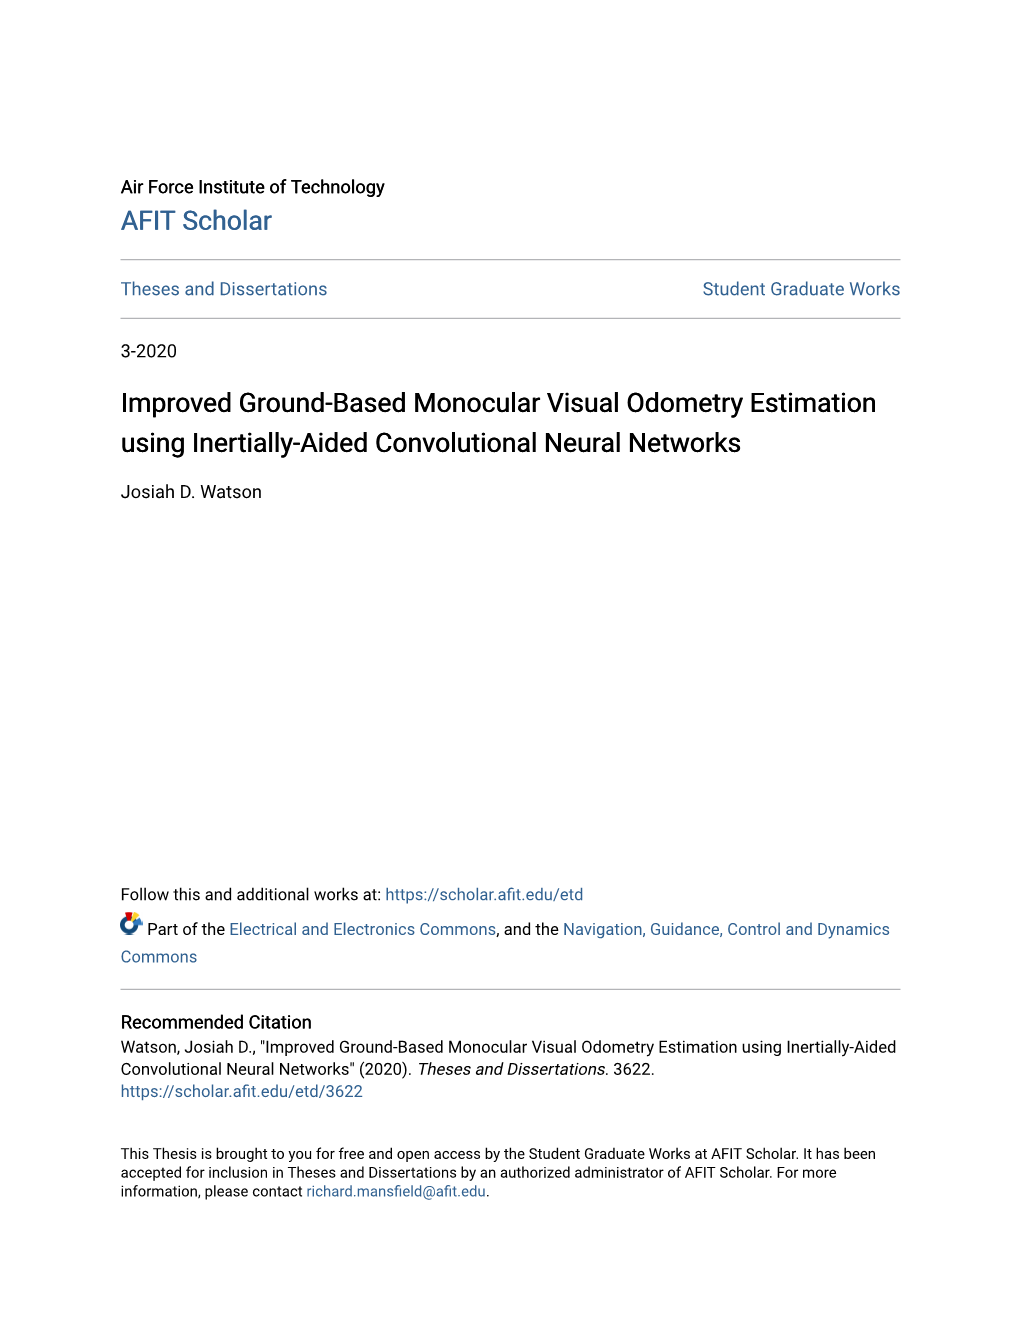 Improved Ground-Based Monocular Visual Odometry Estimation Using Inertially-Aided Convolutional Neural Networks